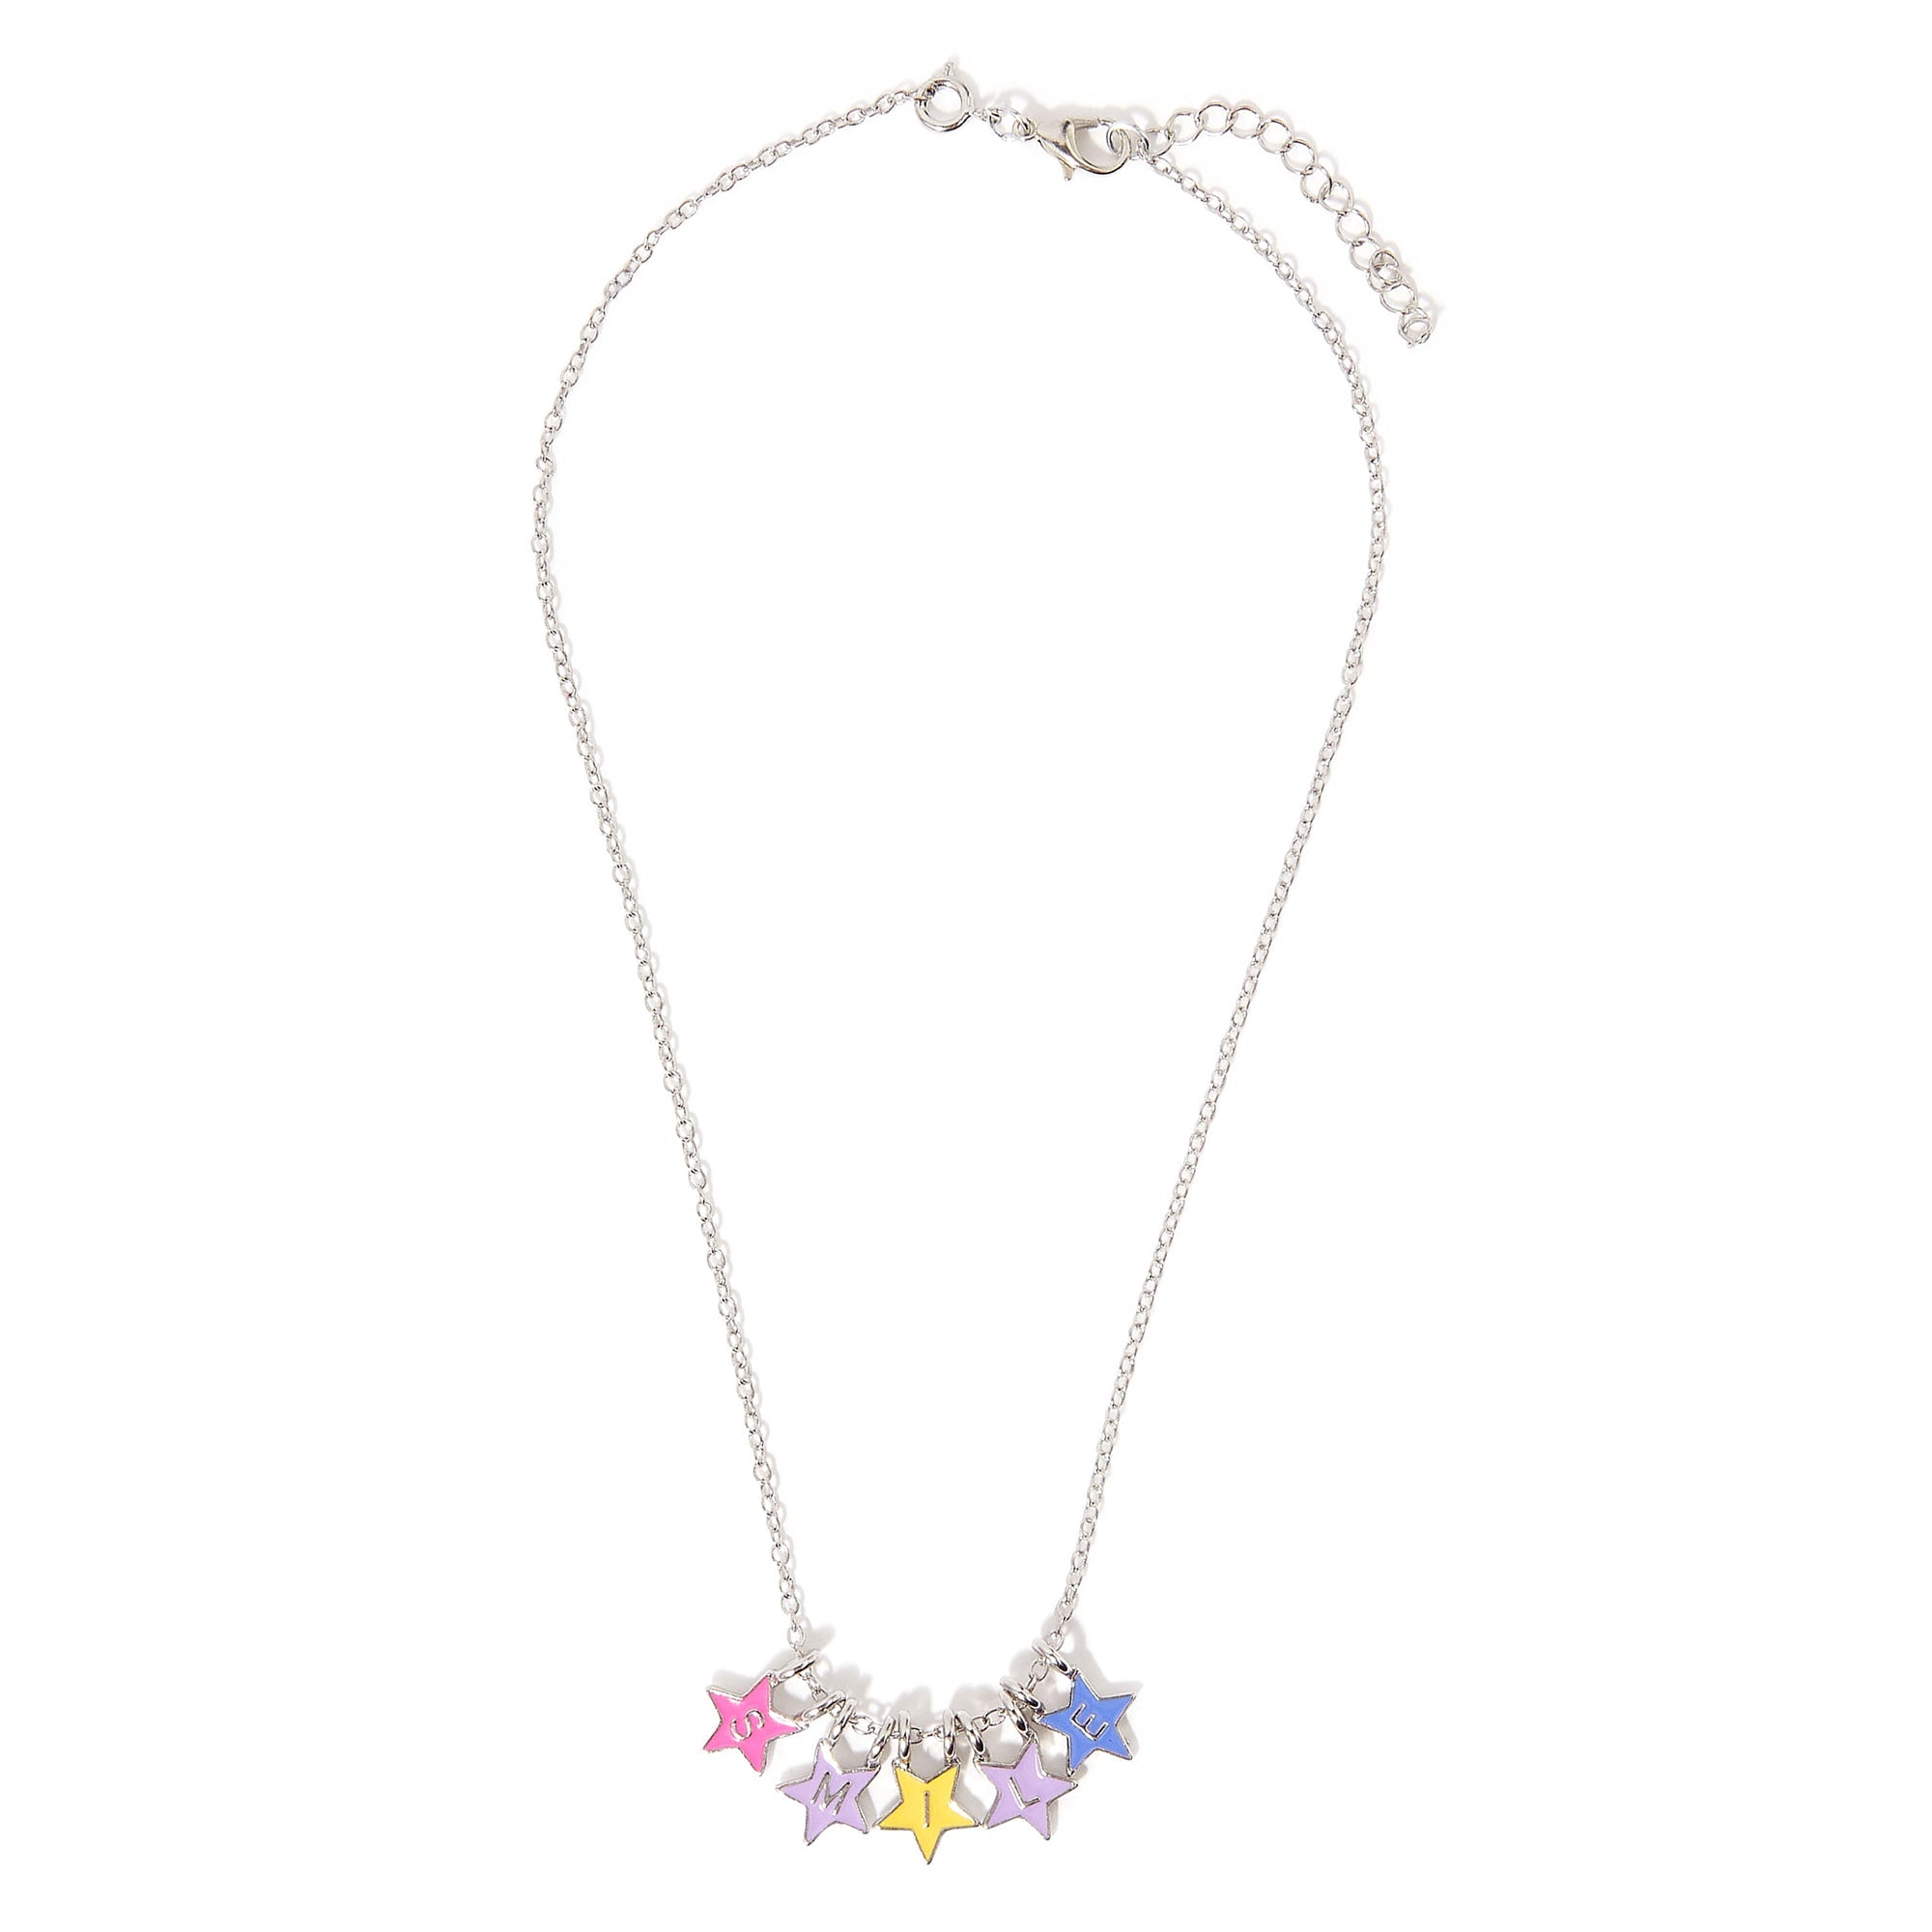 Accessorize London Girl's Make Your Own Star Necklace